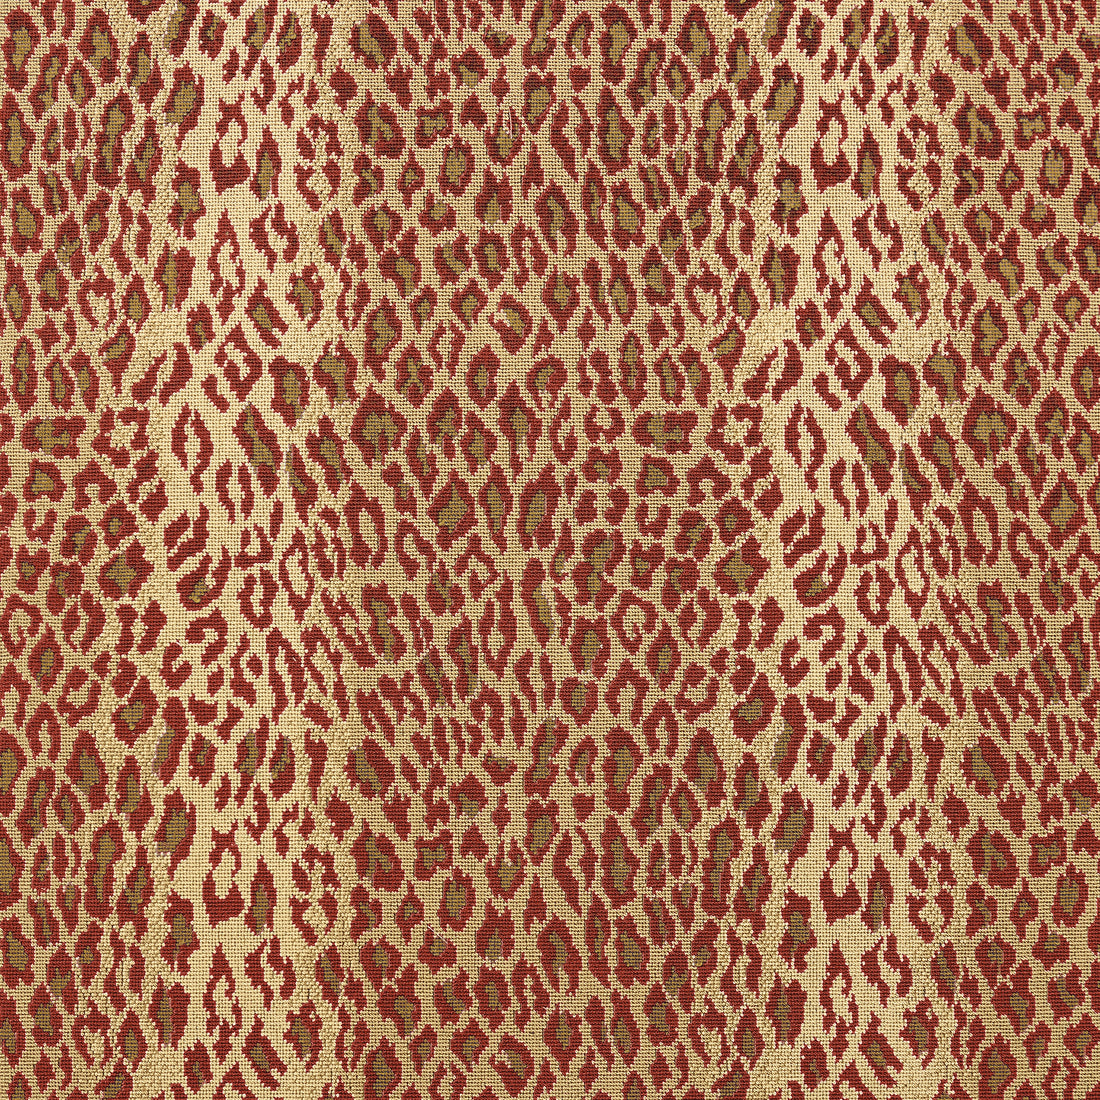 Amur fabric in cardinal color - pattern number W80434 - by Thibaut in the Woven Resource Vol 10 Menagerie collection